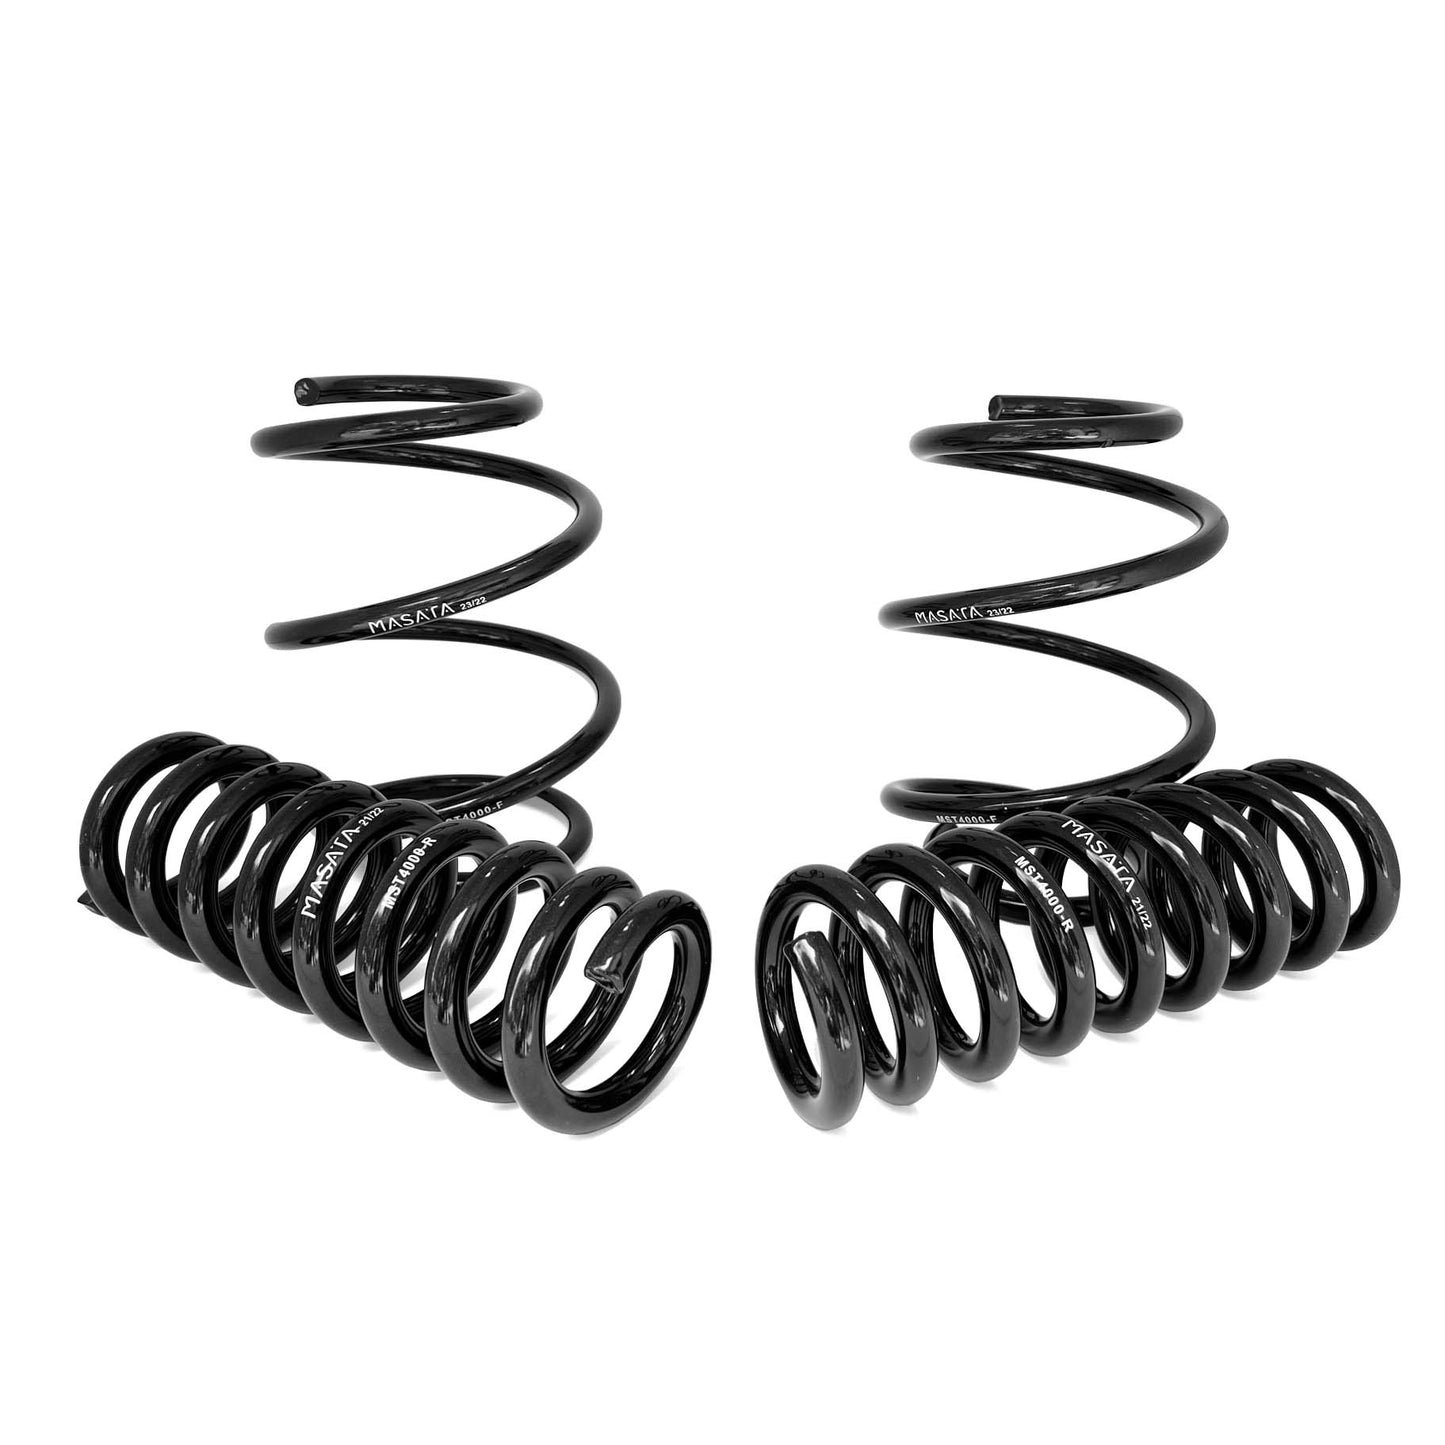 Masata BMW G82 M4/M4 Competition xDrive 30/30mm Performance Lowering Springs